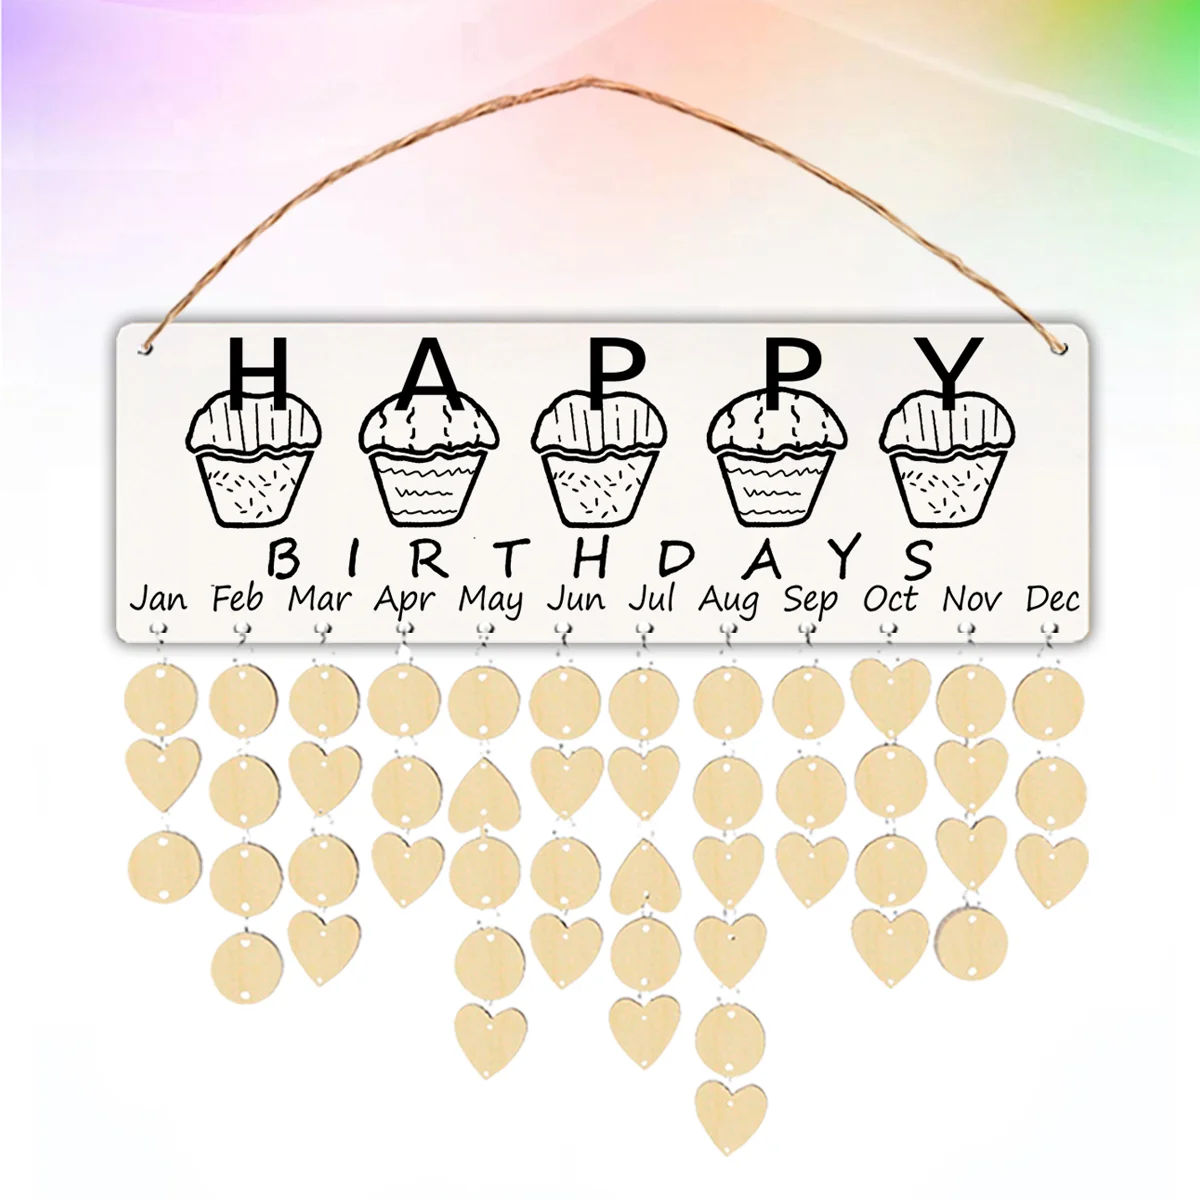 Wooden Birthday Reminder Board DIY Dates Reminder Sign Rope Hanging Events Anniversary Celebration Calendar Wall Plaque with a4 supermarket price label holder sign board with pop clip plastic sign holder display hanging frame